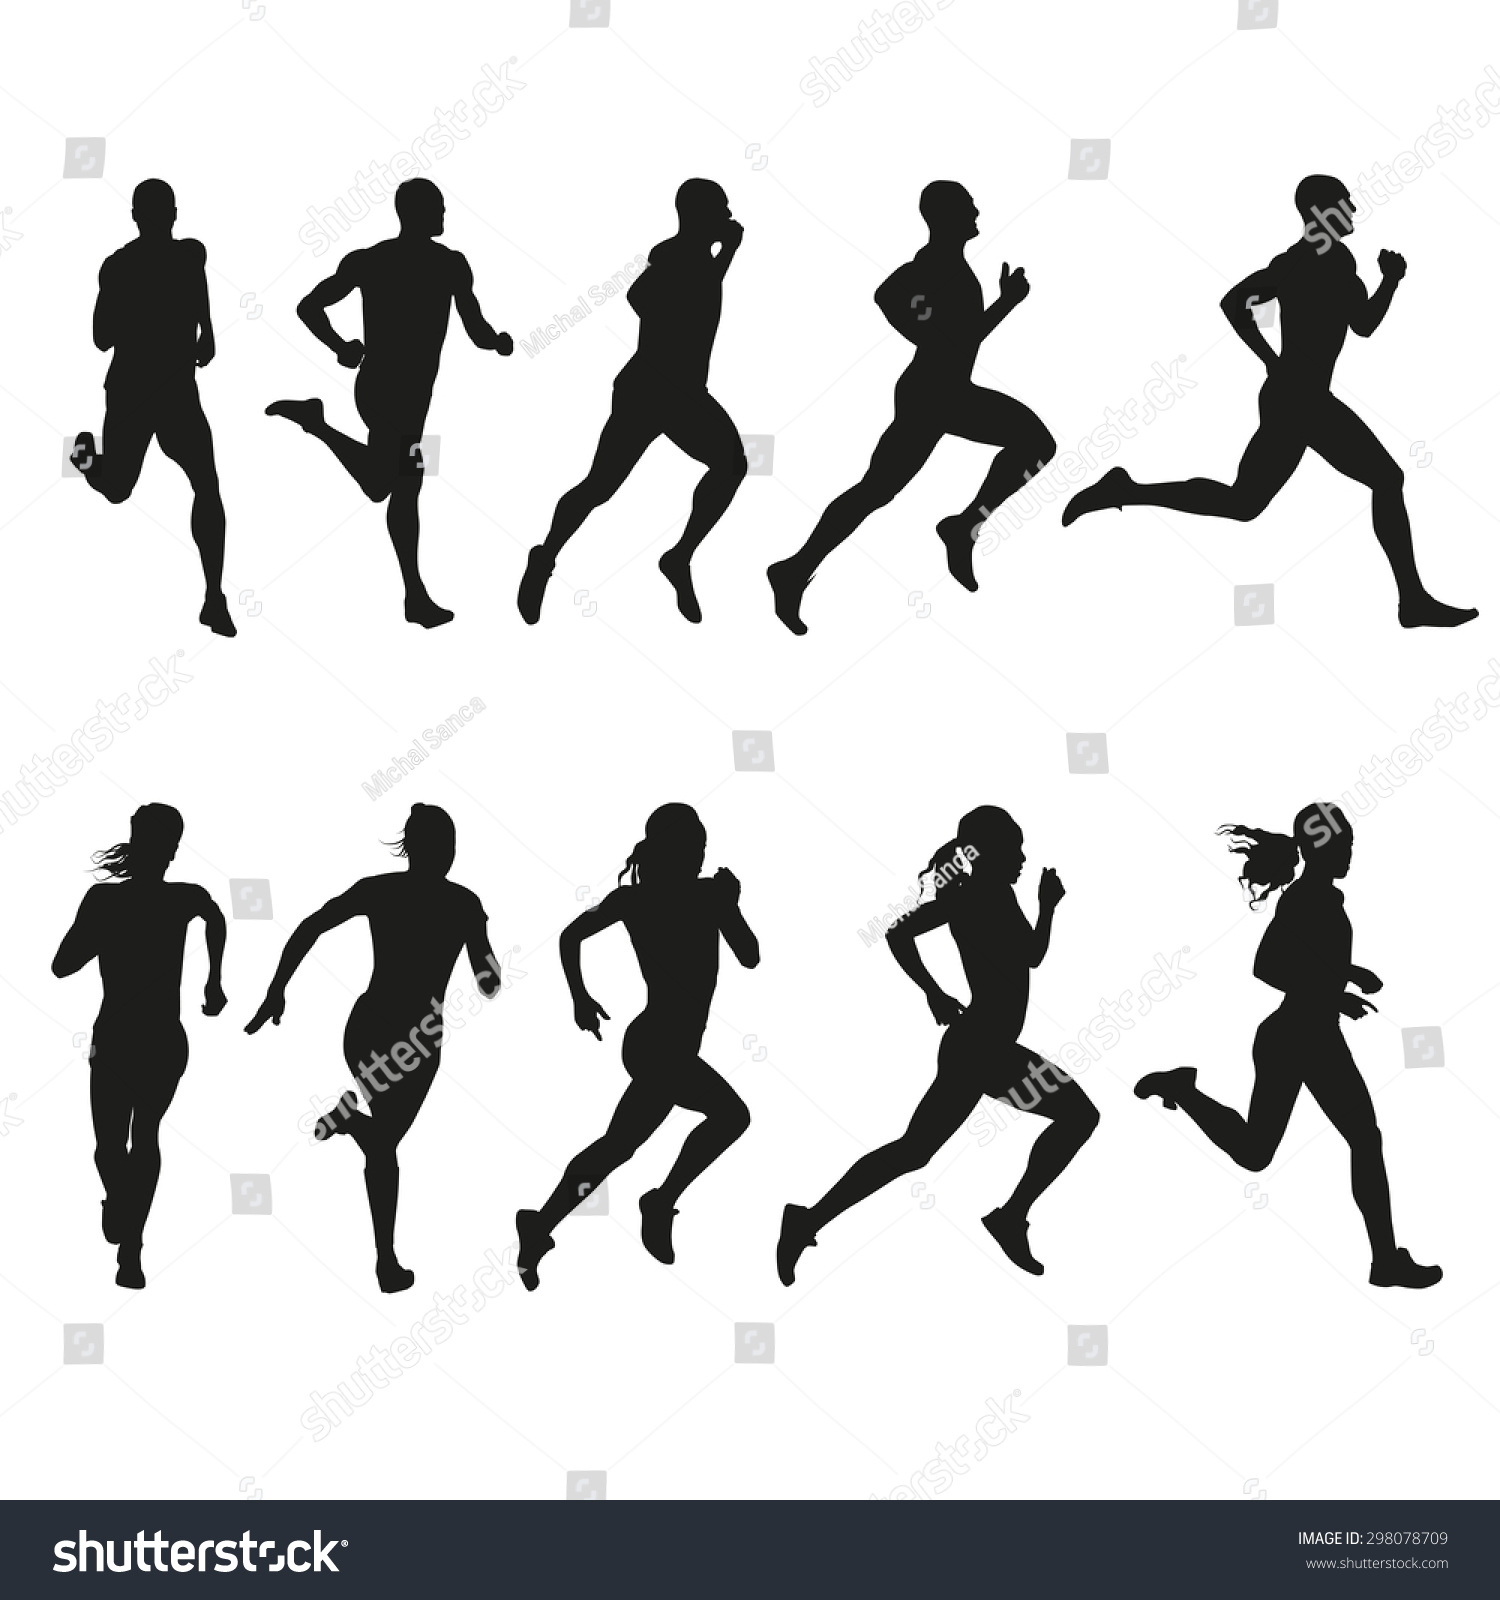 Set Of Silhouettes Of Running Men And Women. Vector, Run - 298078709